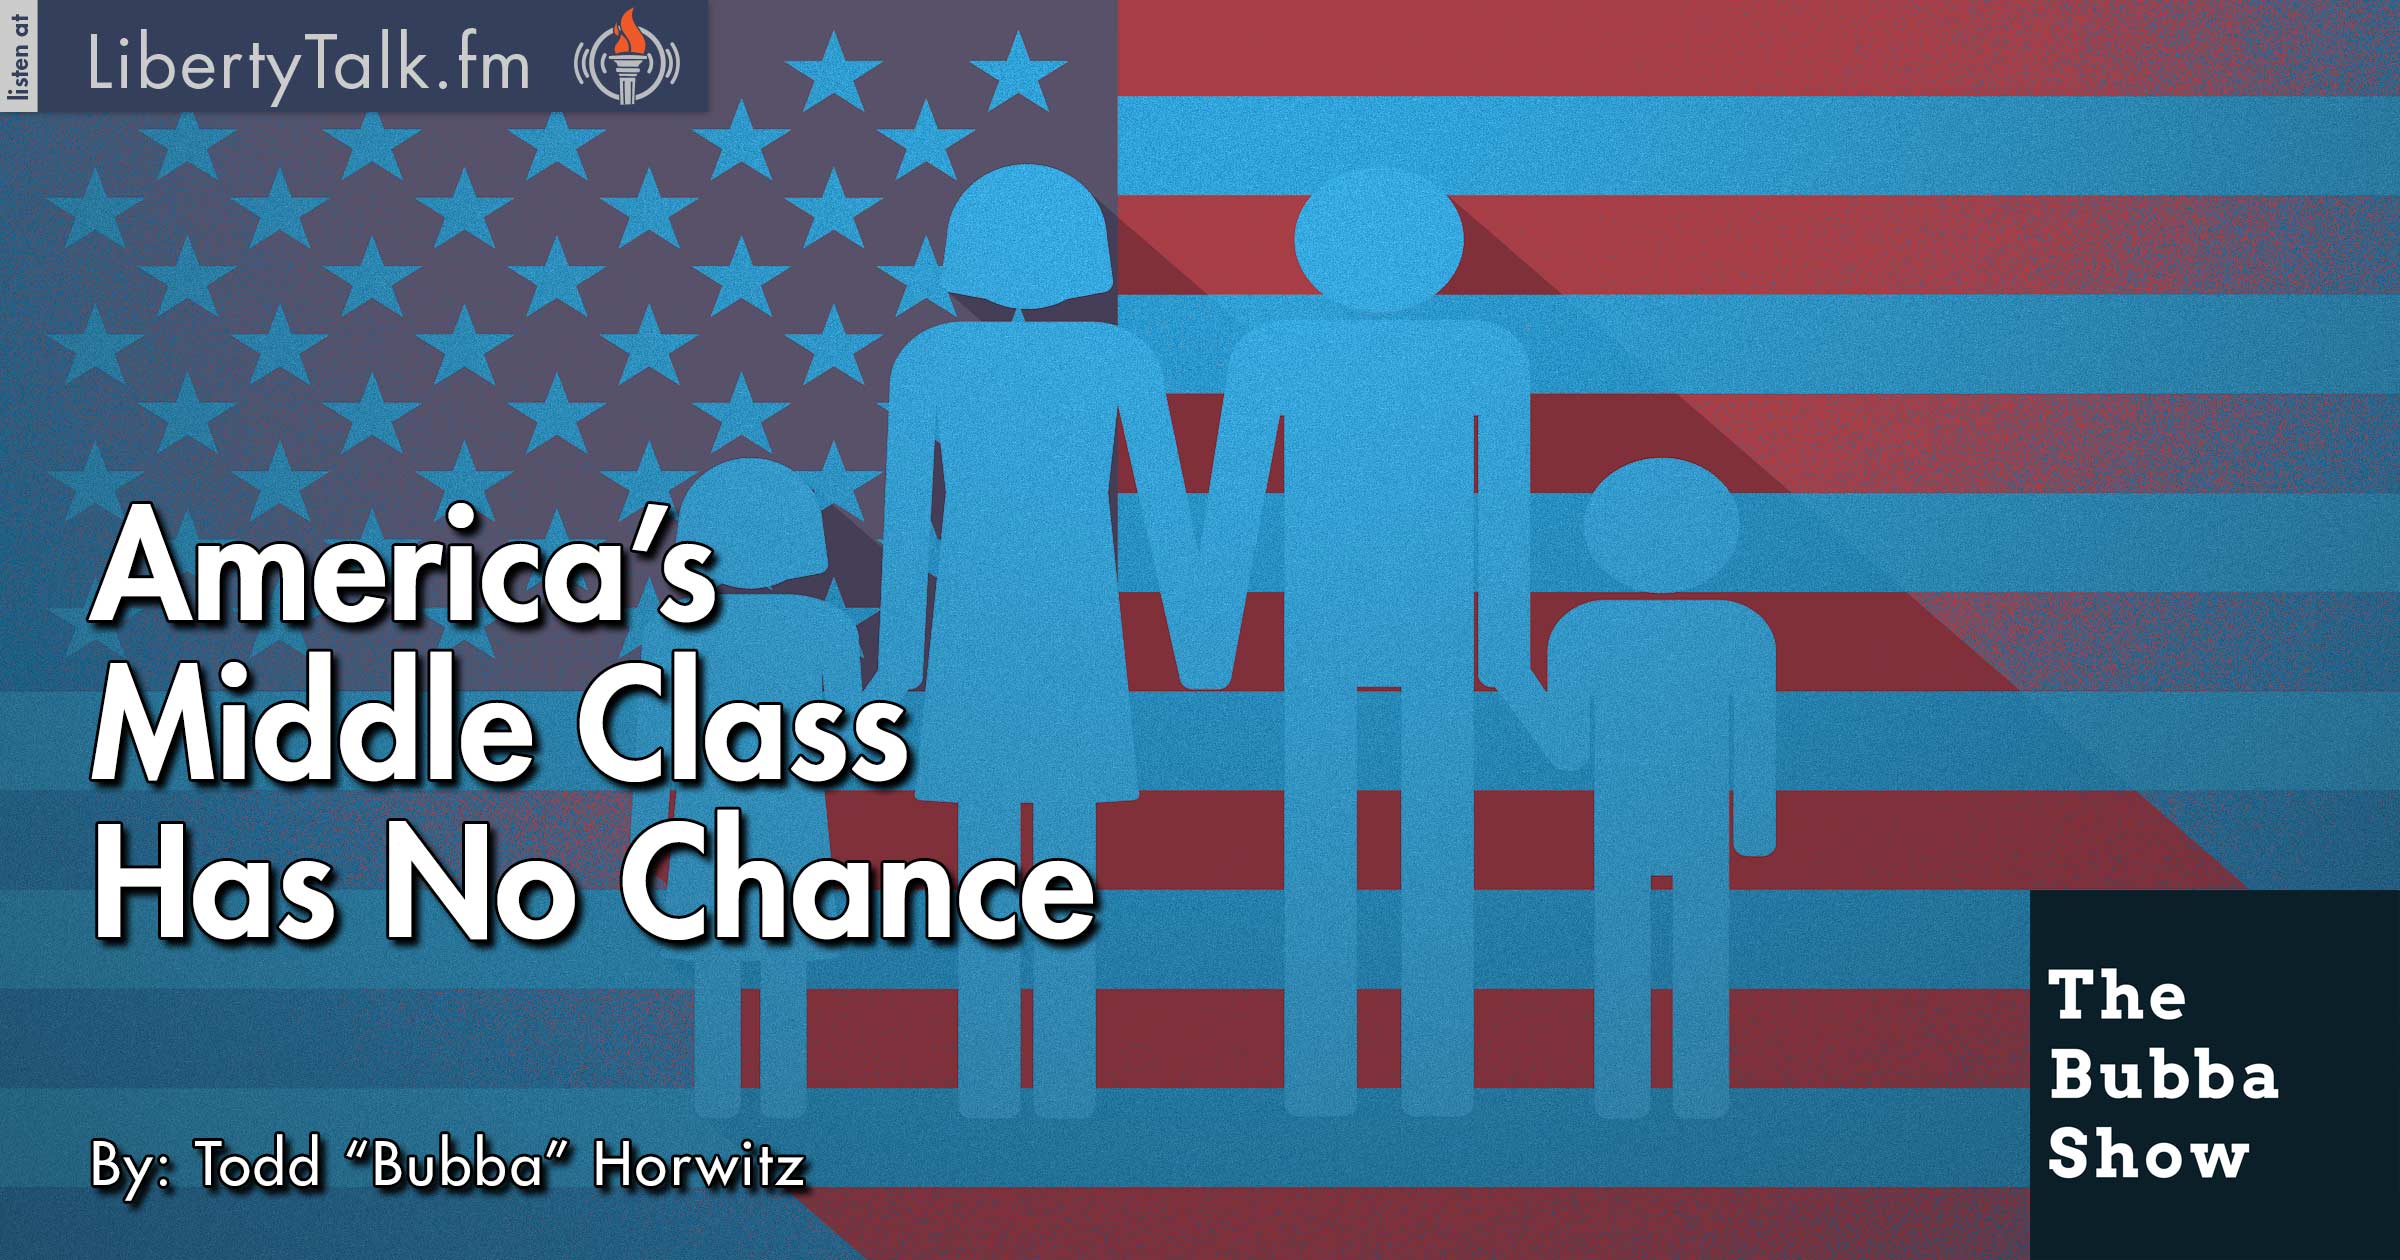 America’s Middle Class Has No Chance - The Bubba Show